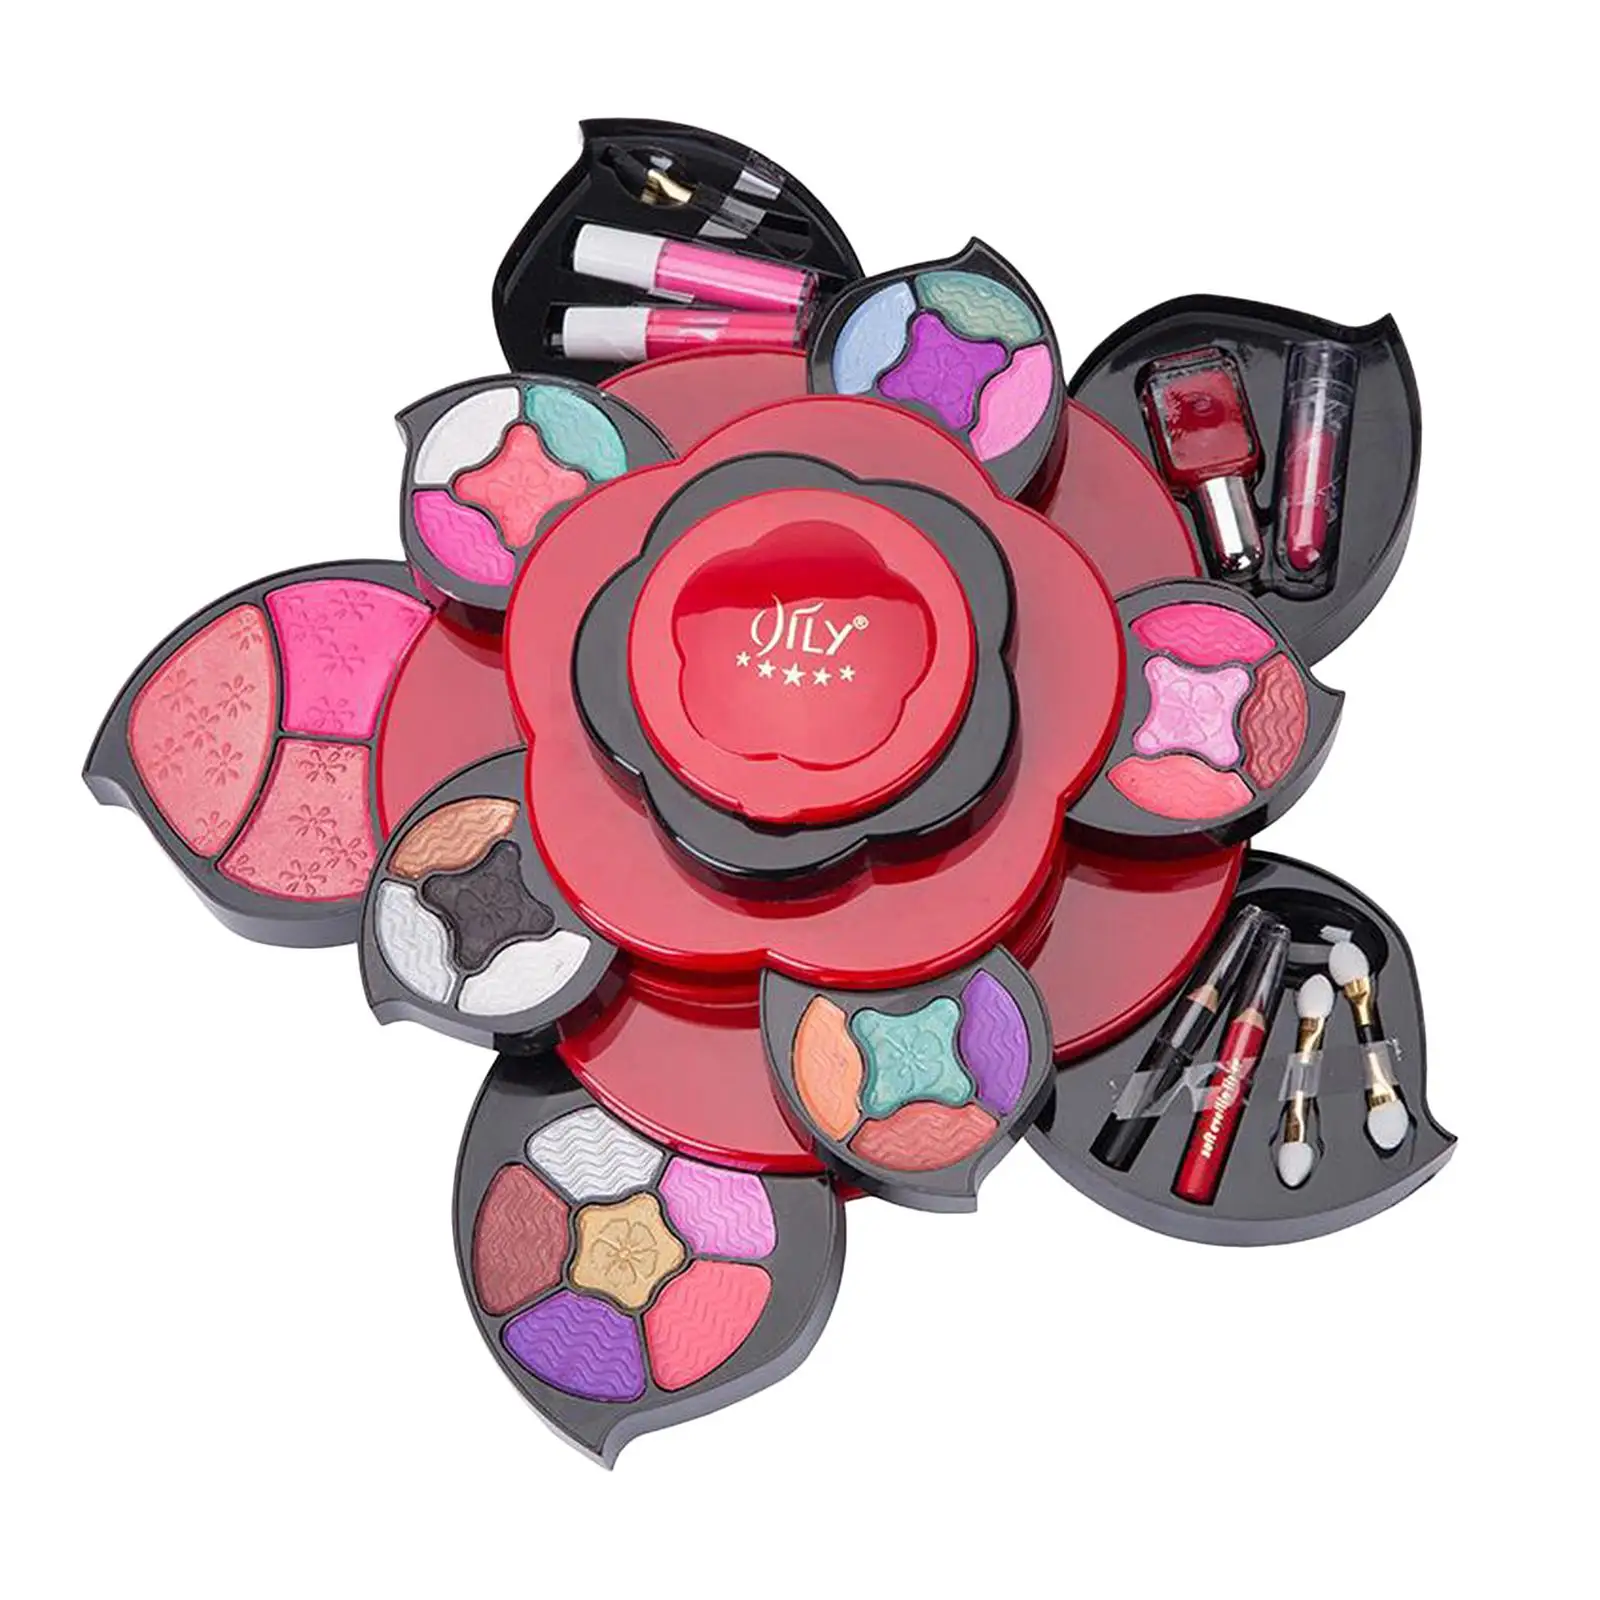 Exclusive Makeup Kits for Teens Flower Make Up Pallete Set for Girls Cosplay